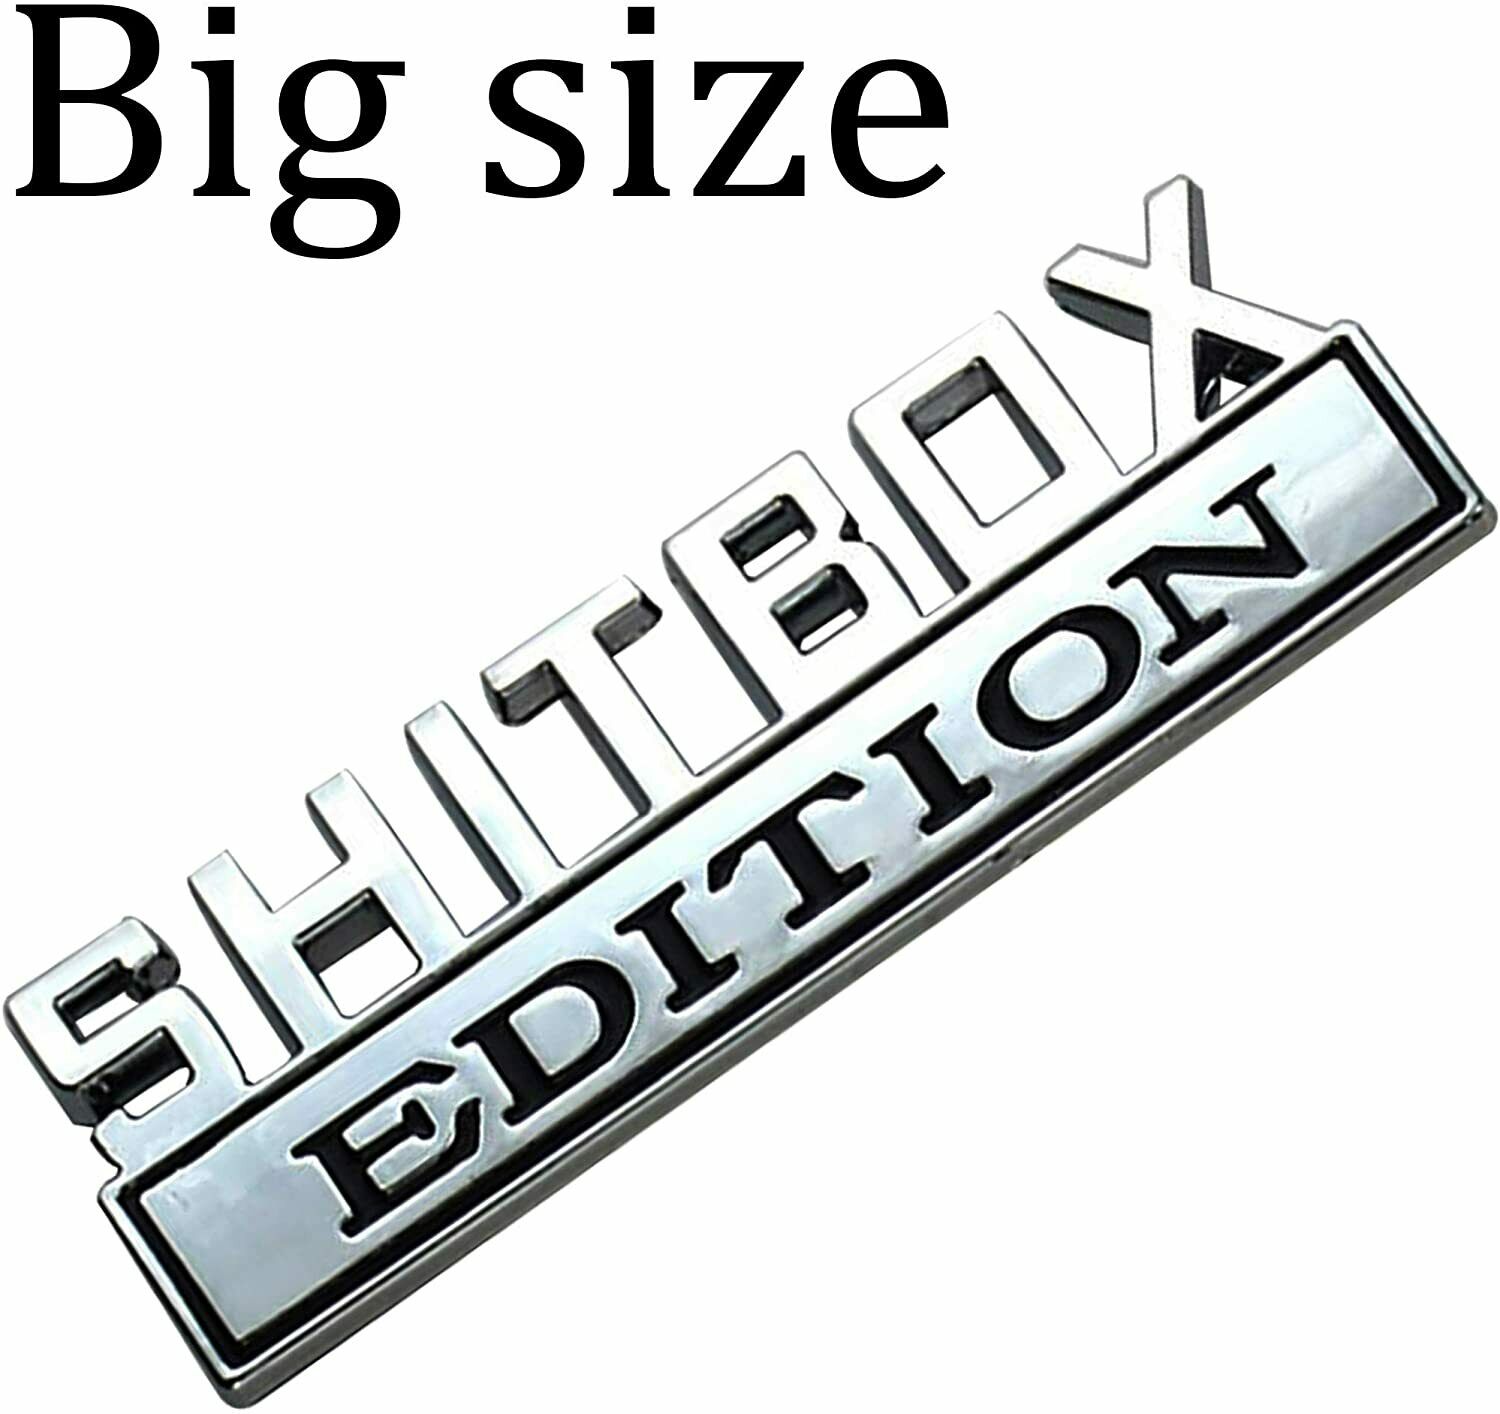 2pc 7" Large Shitbox Edition Emblem Decal Badges Stickers Fit For Ford Chevy Car